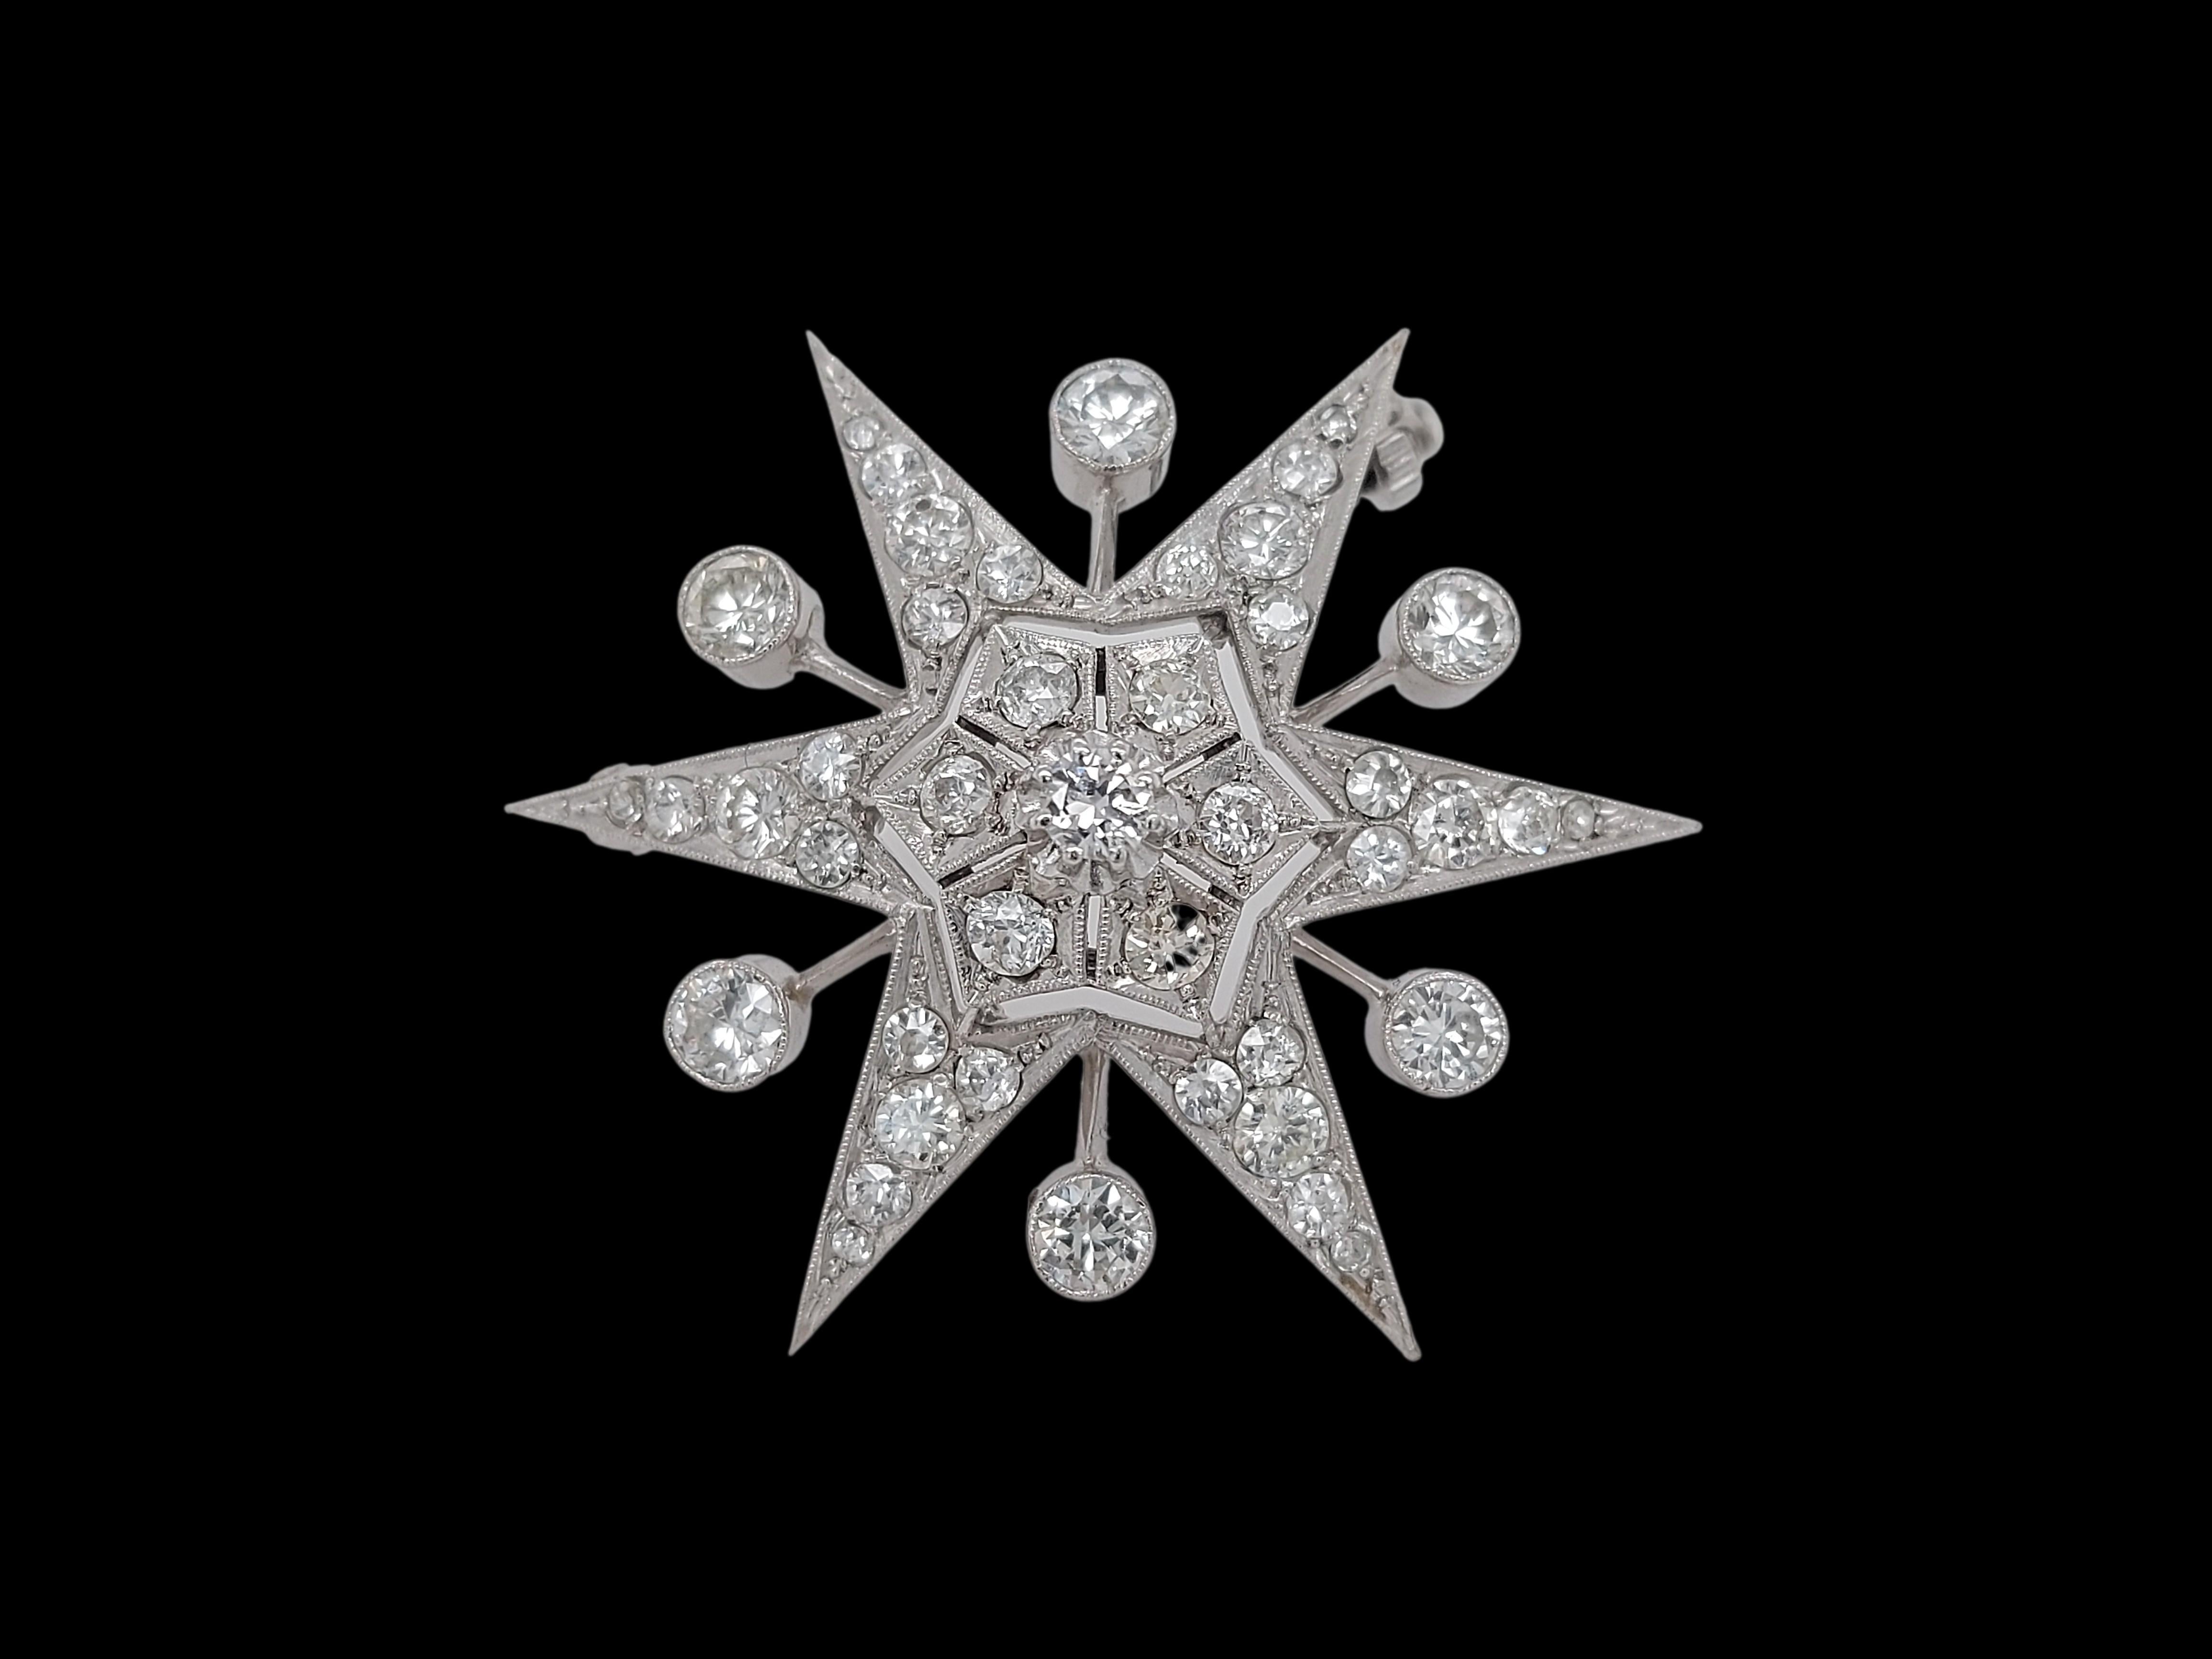 18kt White Gold Star Shape Brooch / Pendant with 3.8ct Diamonds For Sale 2